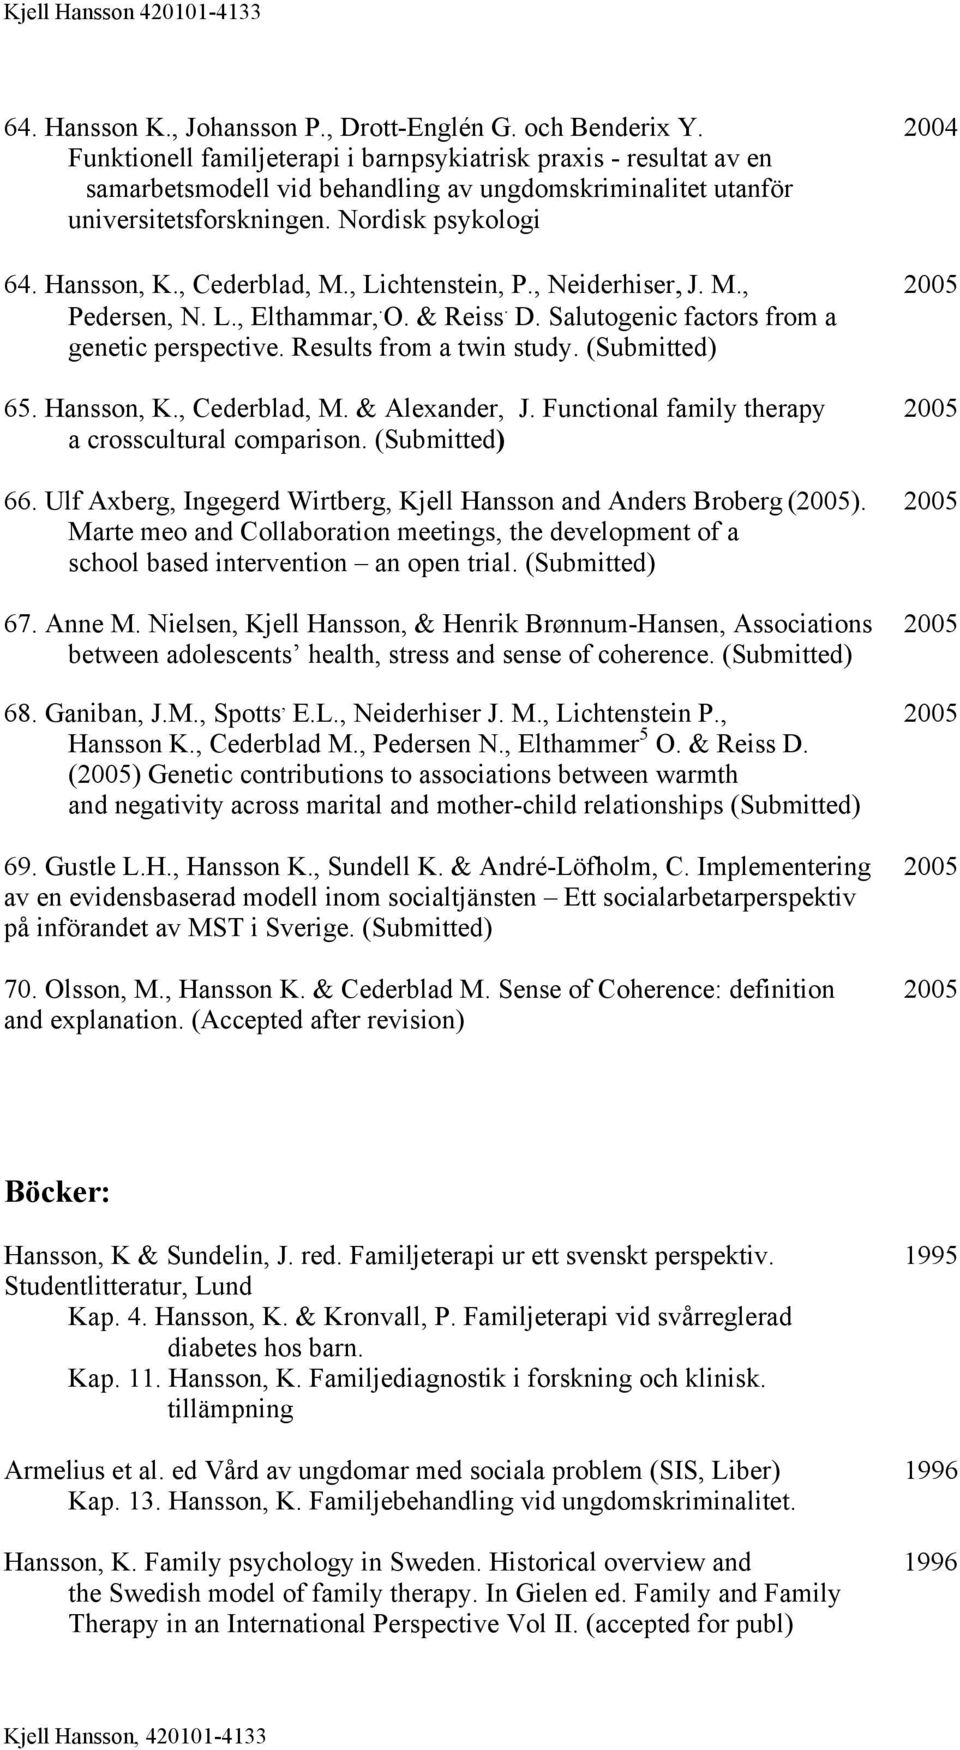 , Cederblad, M., Lichtenstein, P., Neiderhiser, J. M., 2005 Pedersen, N. L., Elthammar,. O. & Reiss. D. Salutogenic factors from a genetic perspective. Results from a twin study. (Submitted) 65.